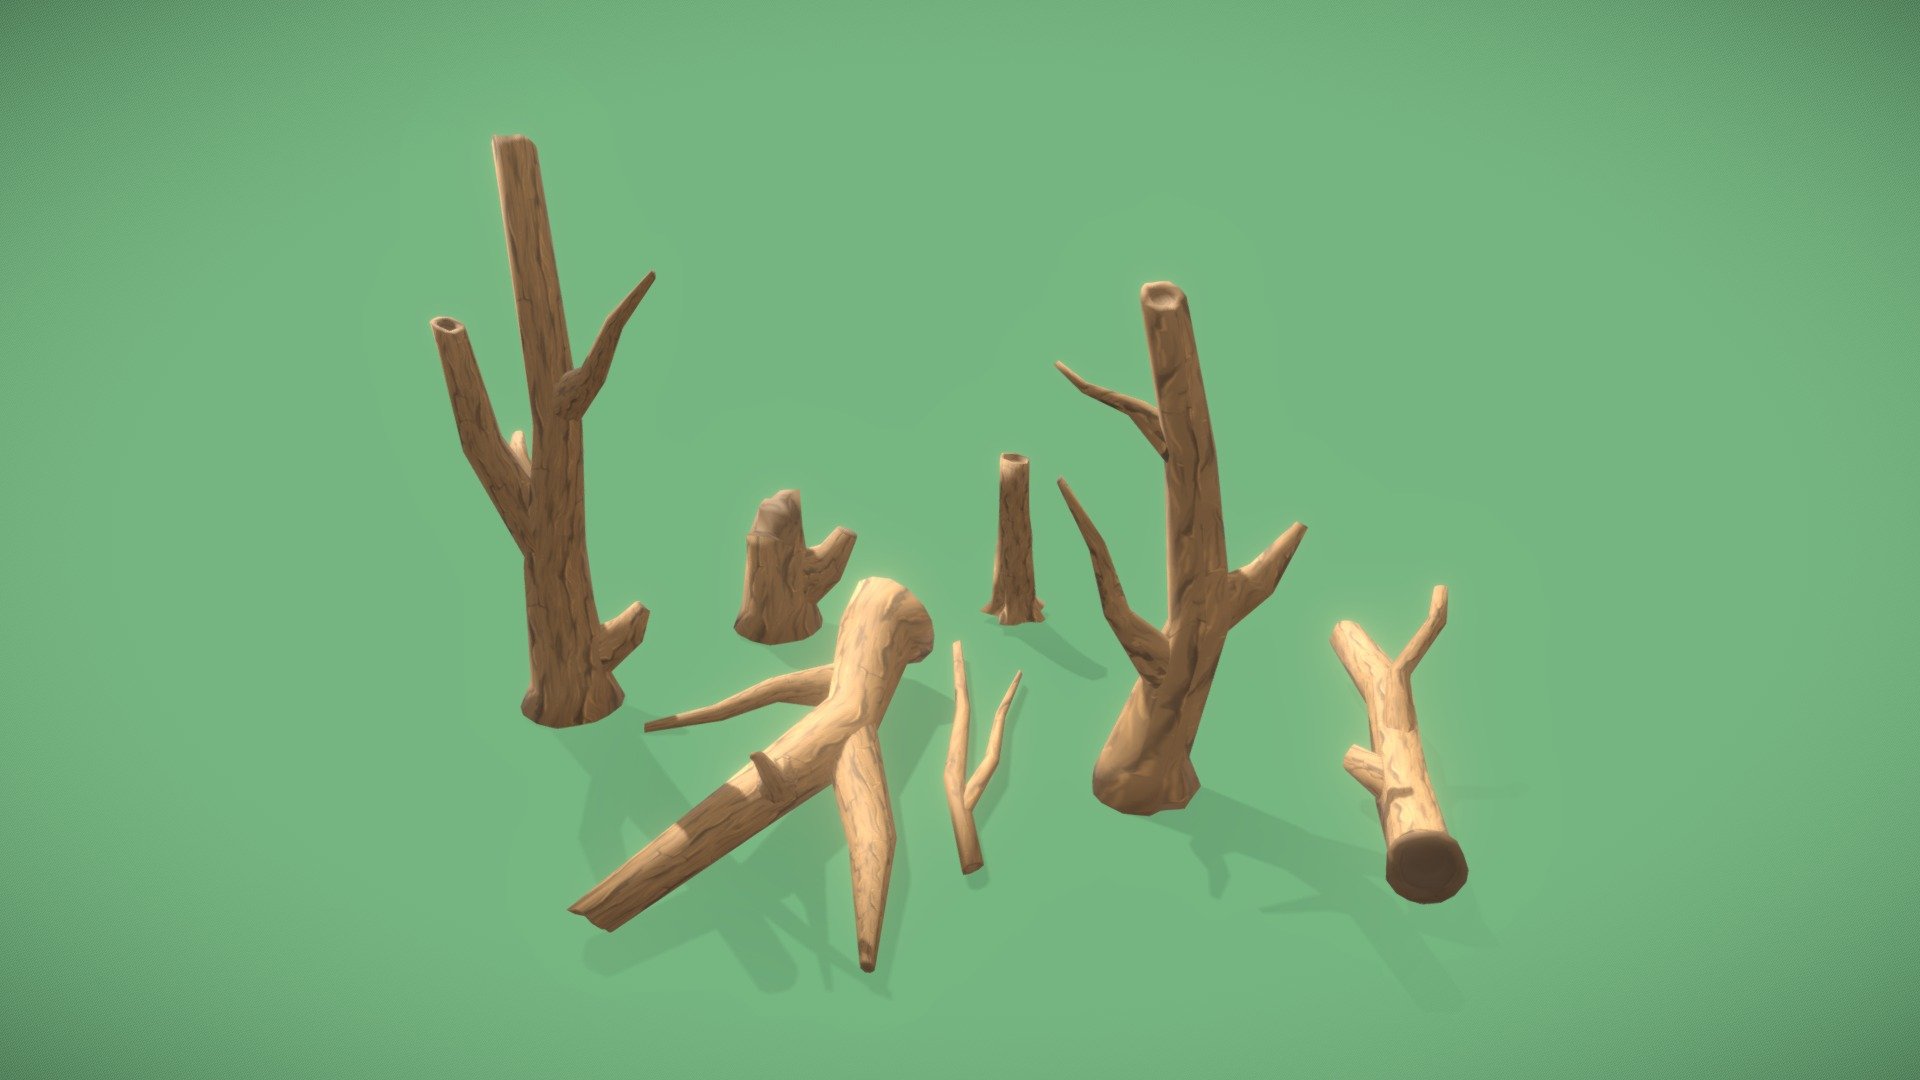 7 deadtrees lowpoly inspired by anime ref image

Property:
Number unique meshs: 7
Max number vertis:1446
Max number triangles:998
LODs:Yes
Collisions:Yes (Simple collision)
Number Material per instance: 1
Number Texture: 1
Texture size : 1024x1024 - Anime Deadtree - Buy Royalty Free 3D model by JABAMI Production (@JabamiProduction) 3d model